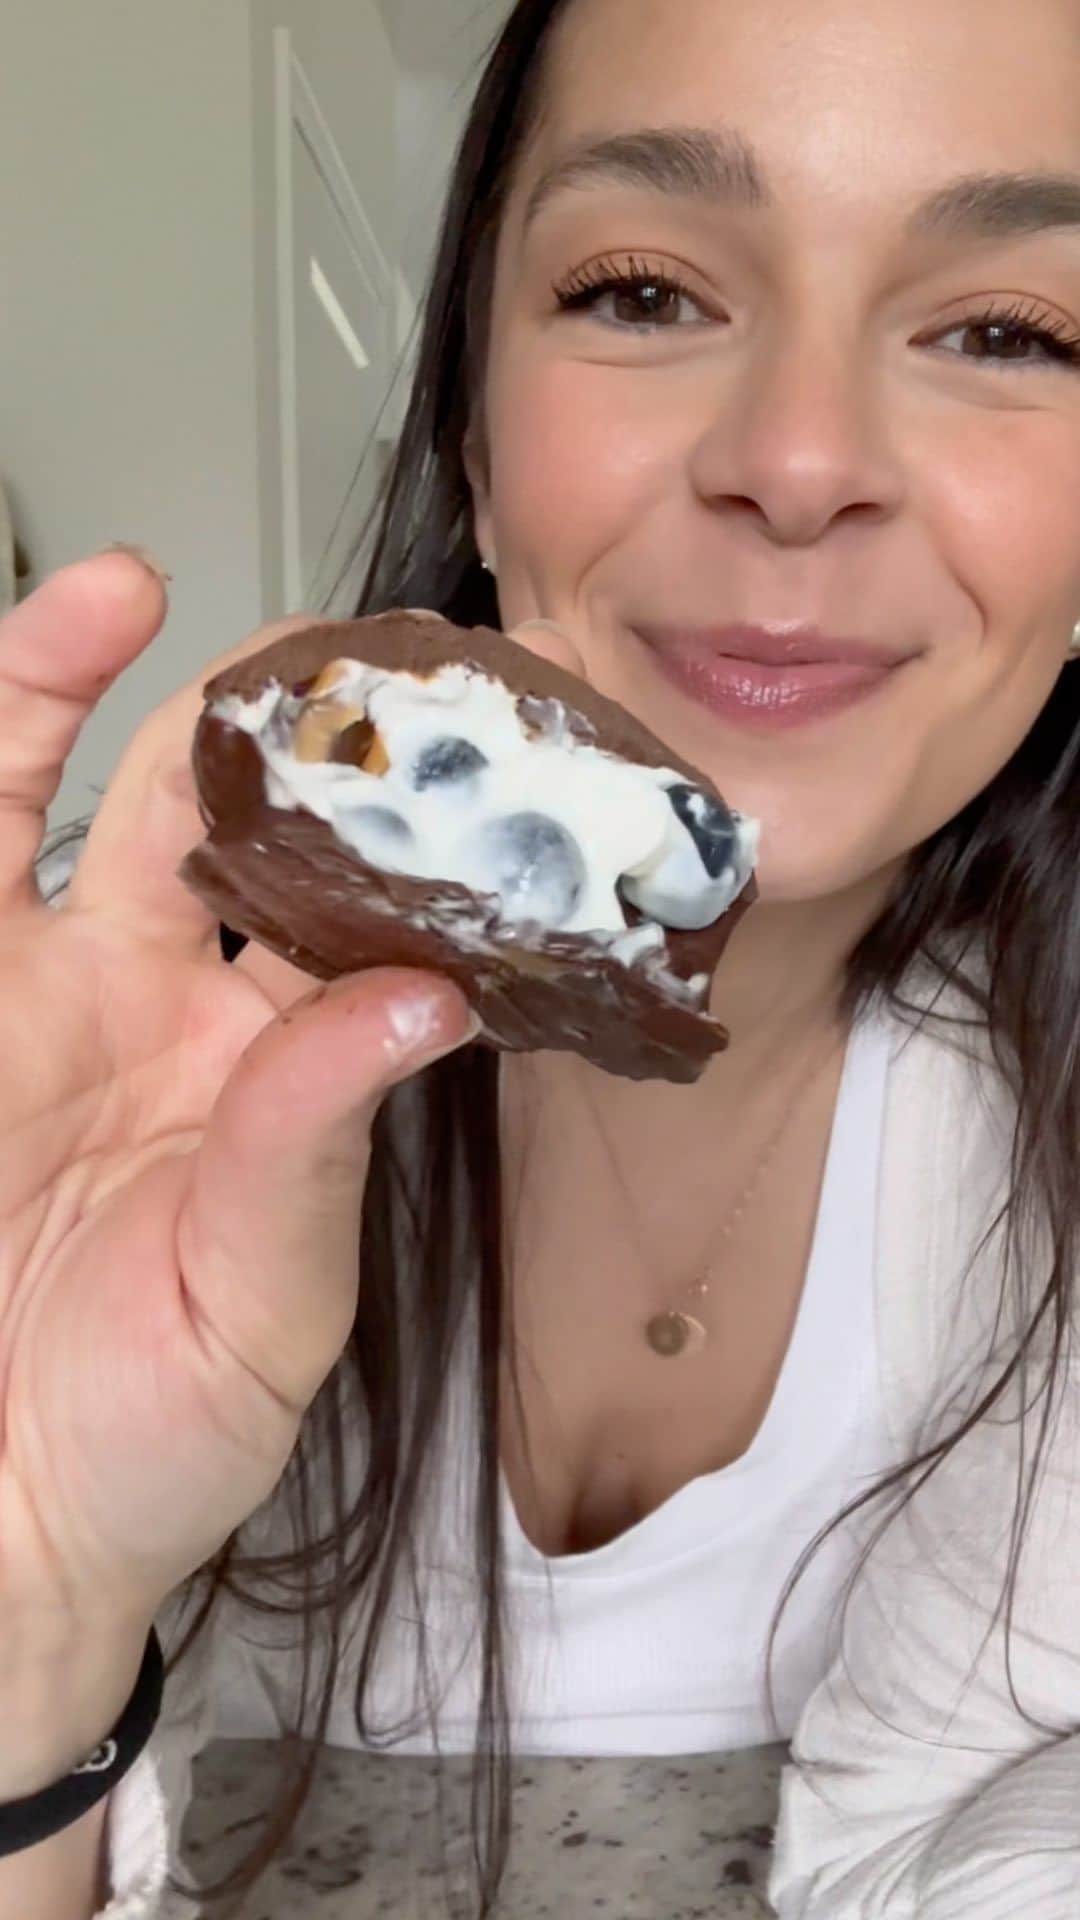 Chobaniのインスタグラム：「These yogurt clusters deserve the hype! Try these chocolate covered yogurt clusters with Chobani Greek yogurt ASAP (with a peanut butter twist!). They have a great combination of protein, fiber and fat for a fun snack that’s also super satisfying. You can swap in your favorite fresh fruit too, like raspberries or strawberries. Make sure to save this one so you can throw these together the next time you’re in the mood for a creamy, frozen treat!  🫐 Ingredients 🫐 • 2 cups blueberries, washed and dried • 1 cup Chobani Plain Greek Yogurt • 1 tbsp honey • 3-4 tbsp peanut butter, melted • 1½ cups chocolate chips • 1 teaspoon coconut oil  🍫 Directions 🍫 1️⃣ In a mixing bowl, combine blueberries, yogurt, and honey. 2️⃣ Using a spoon, scoop about 6-8 small clusters of the mixture onto a parchment paper-lined sheet pan. Drizzle each cluster with about ½ tbsp of melted peanut butter. 3️⃣ Place in the freezer for 45-60 minutes until the clusters are frozen solid. 4️⃣ In a microwave-safe bowl, melt the chocolate and coconut oil in 30 second intervals, mixing in between each, until smooth and melted. 5️⃣ Carefully but quickly dip each frozen cluster into the melted chocolate, using a spoon to coat the cluster. Place back on the baking sheet to harden. Once hardened, the clusters can be enjoyed immediately. Freeze for 5 minutes if desired.  #snackideas #easysnack #greekyogurt #sweettreat」